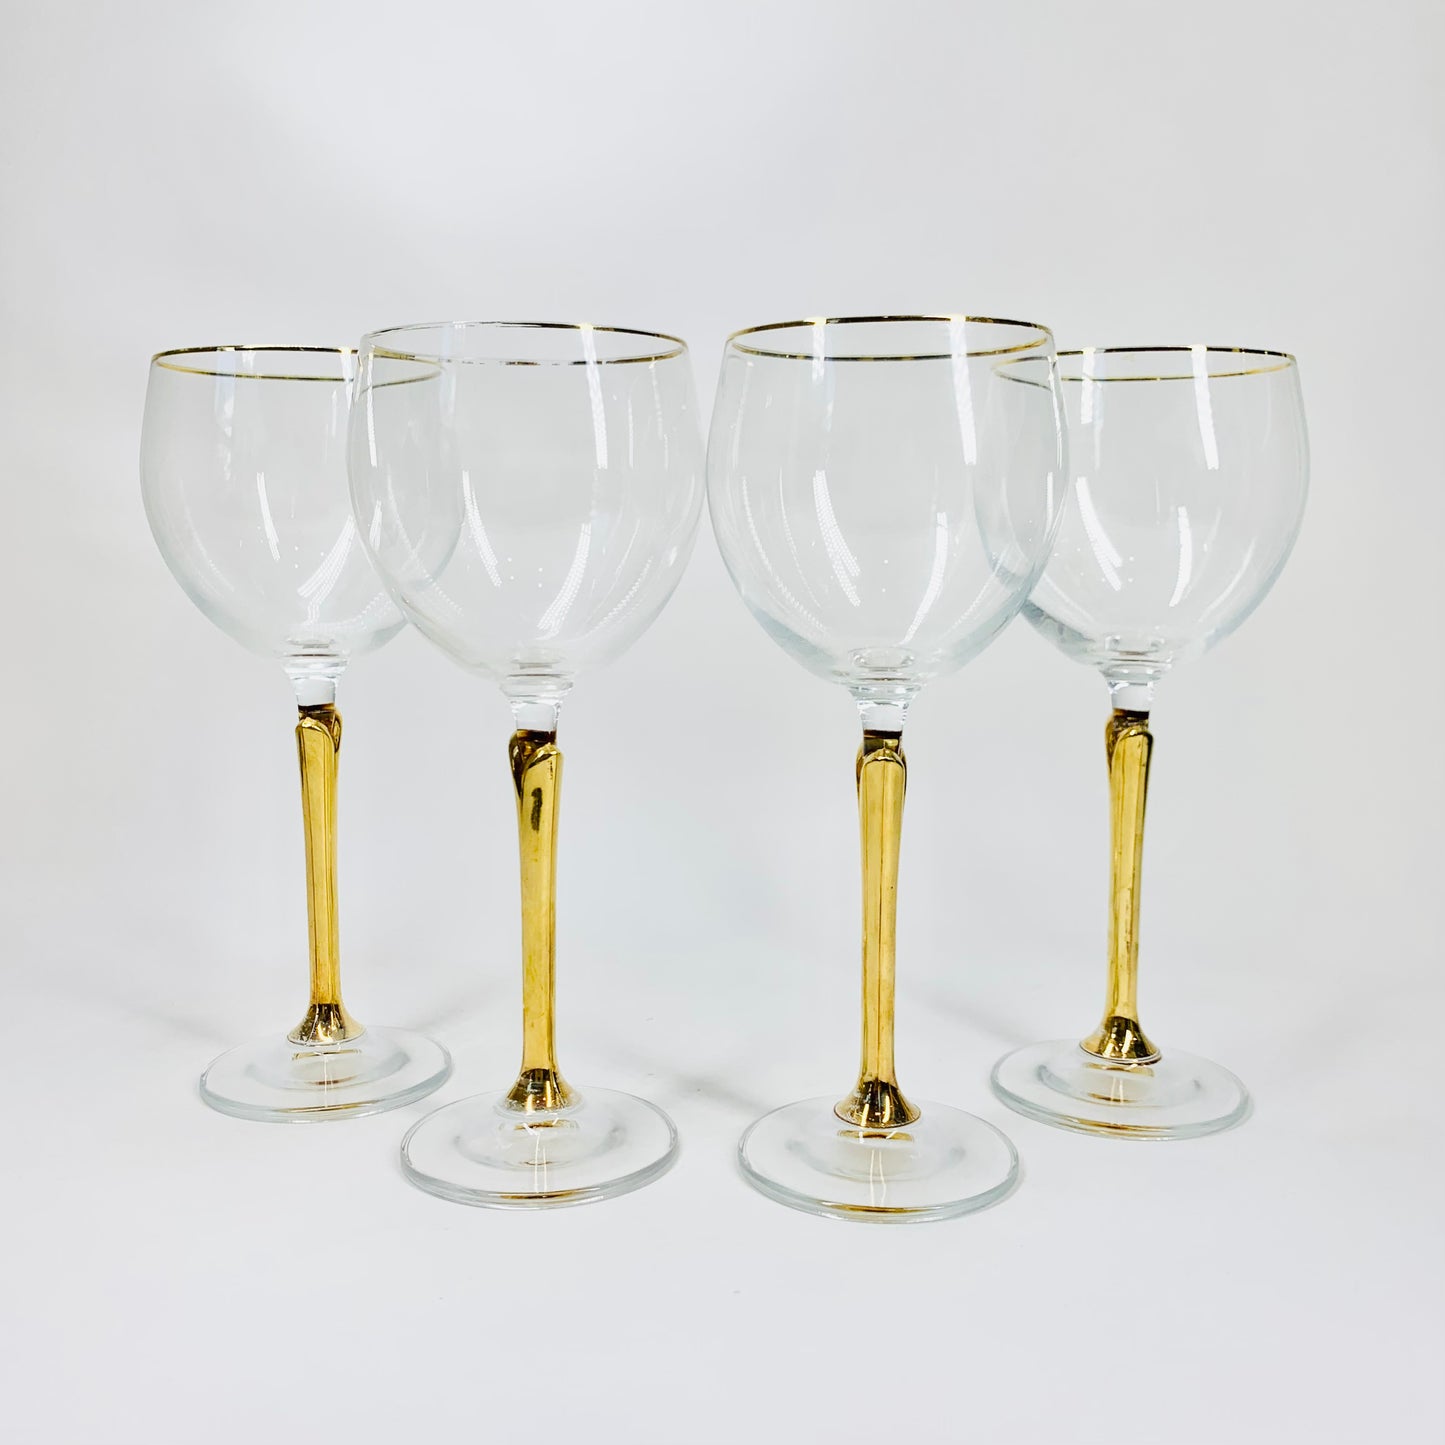 Rare Midcentury Tiffin Franciscan gold rim wine glasses with gold tulip stems